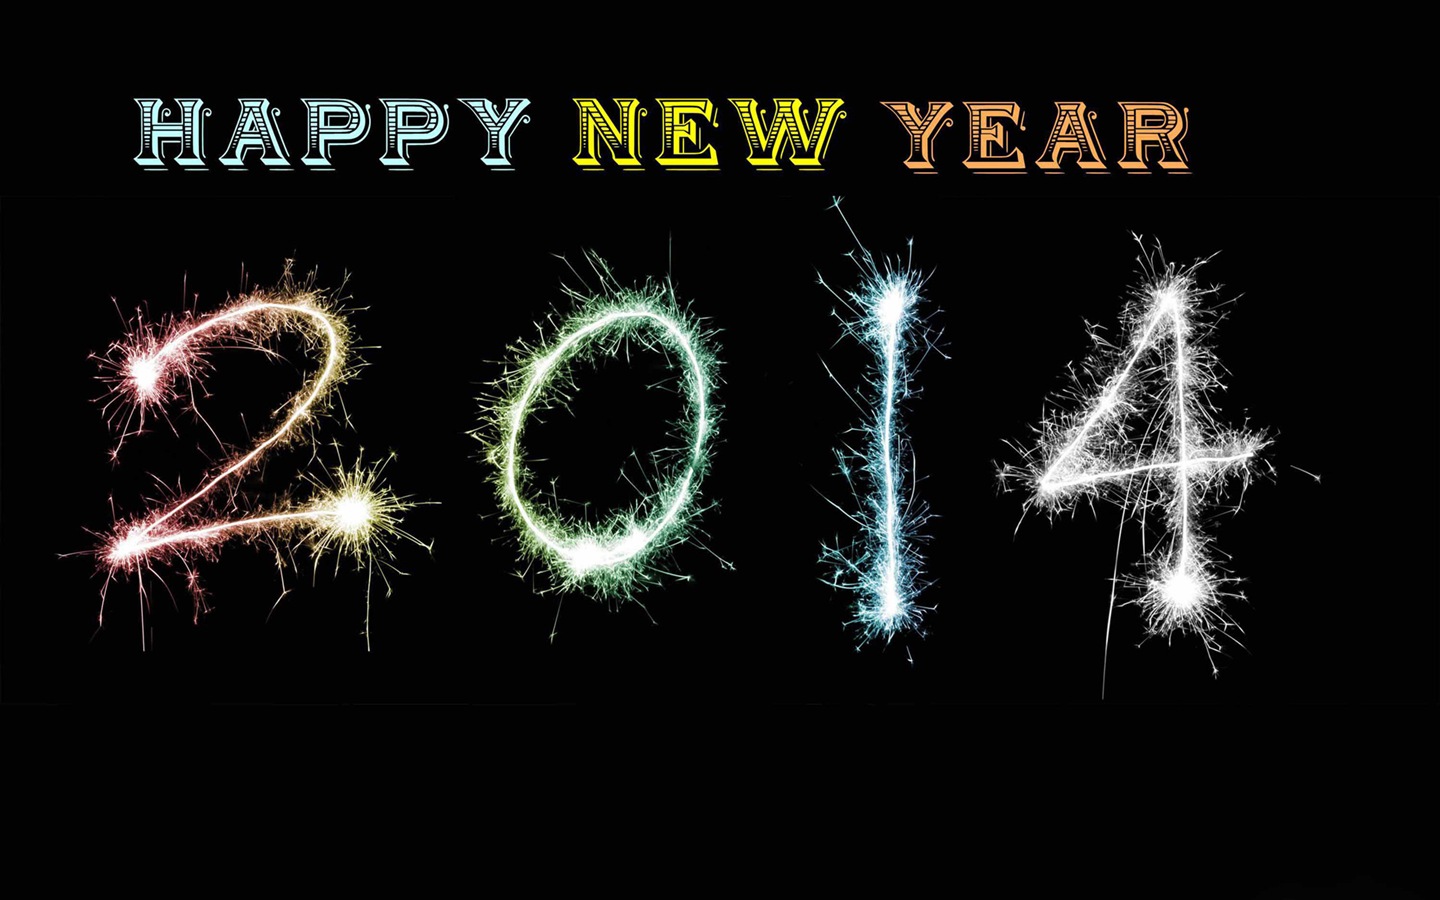 2014 New Year Theme HD Wallpapers (2) #12 - 1440x900